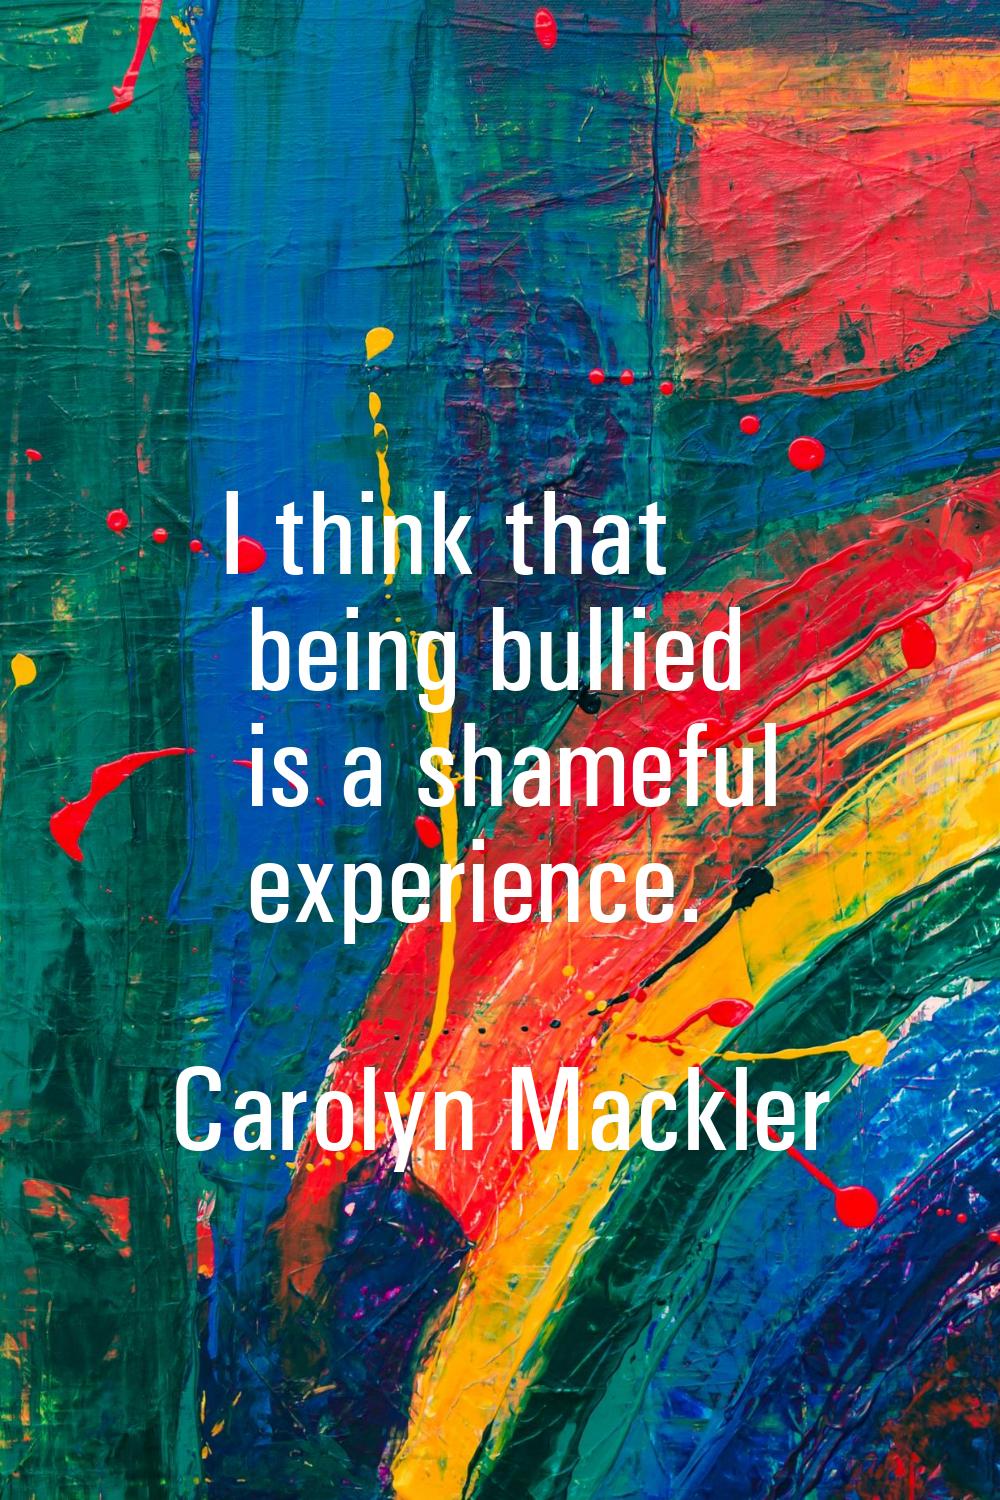 I think that being bullied is a shameful experience.